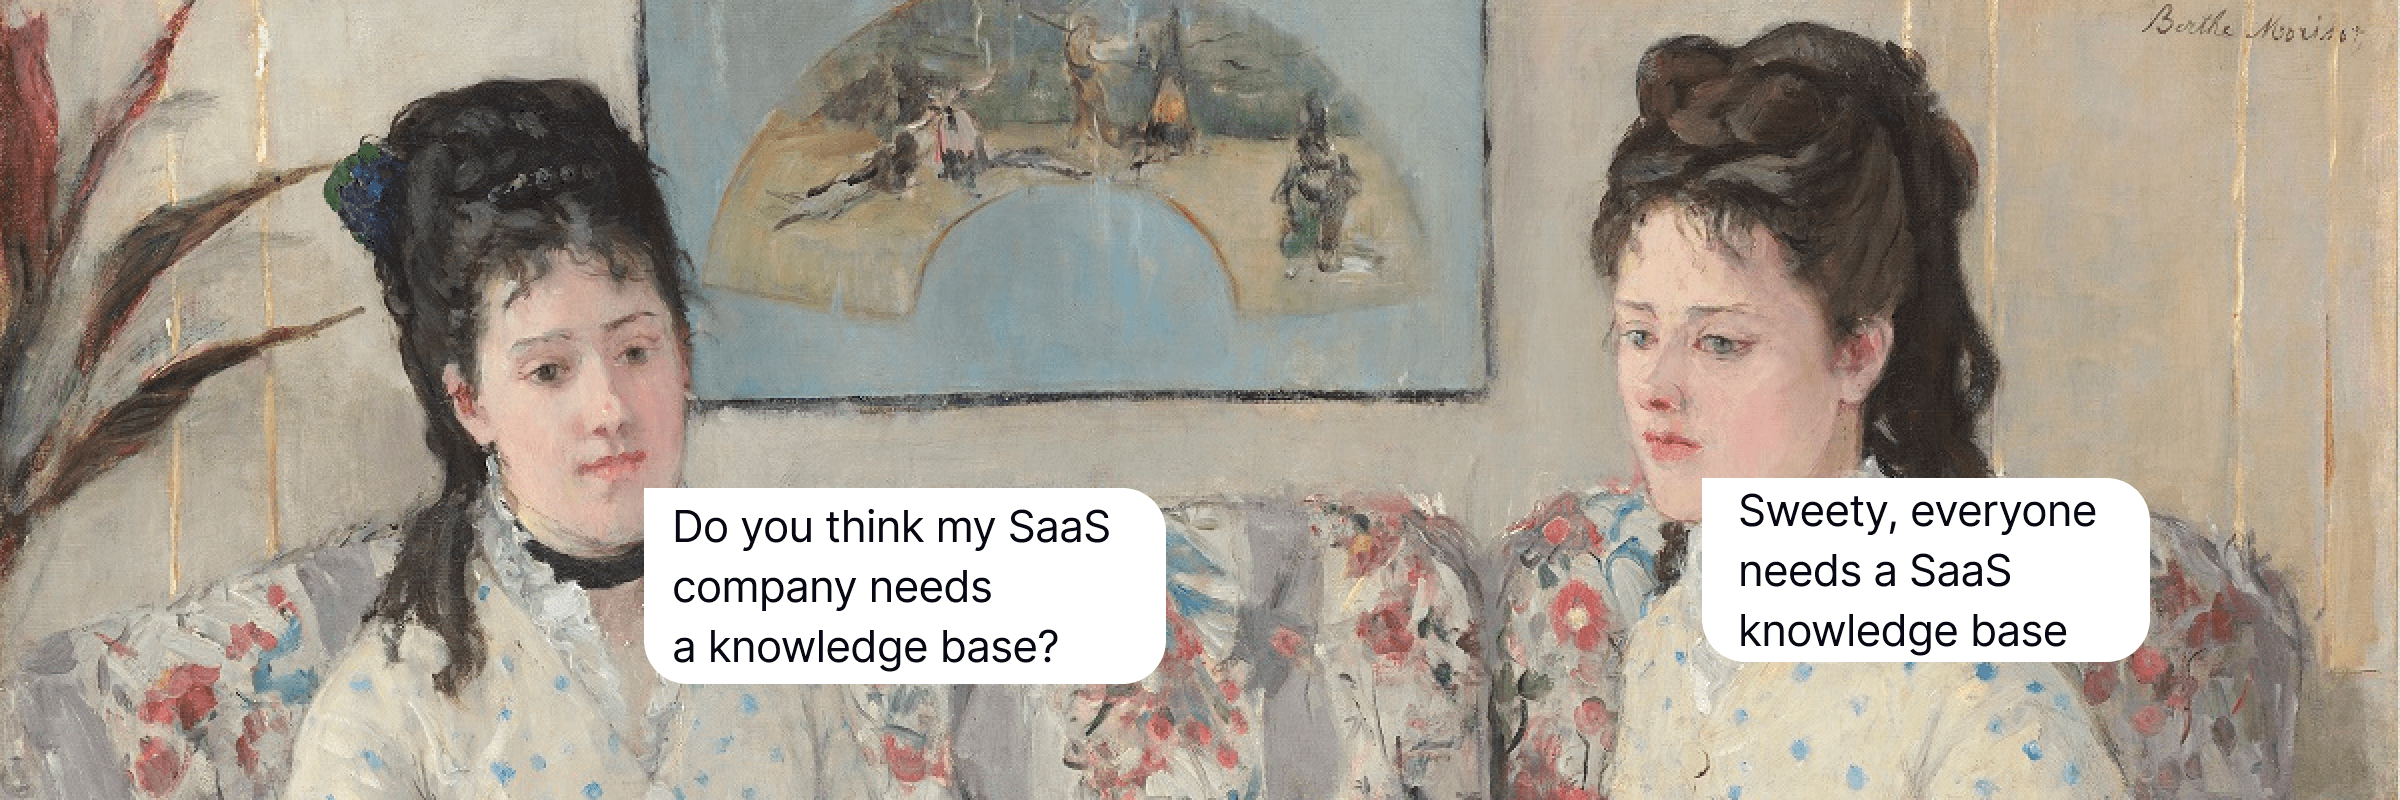 SaaS Knowledge Base: The Actual Meaning and Best Examples